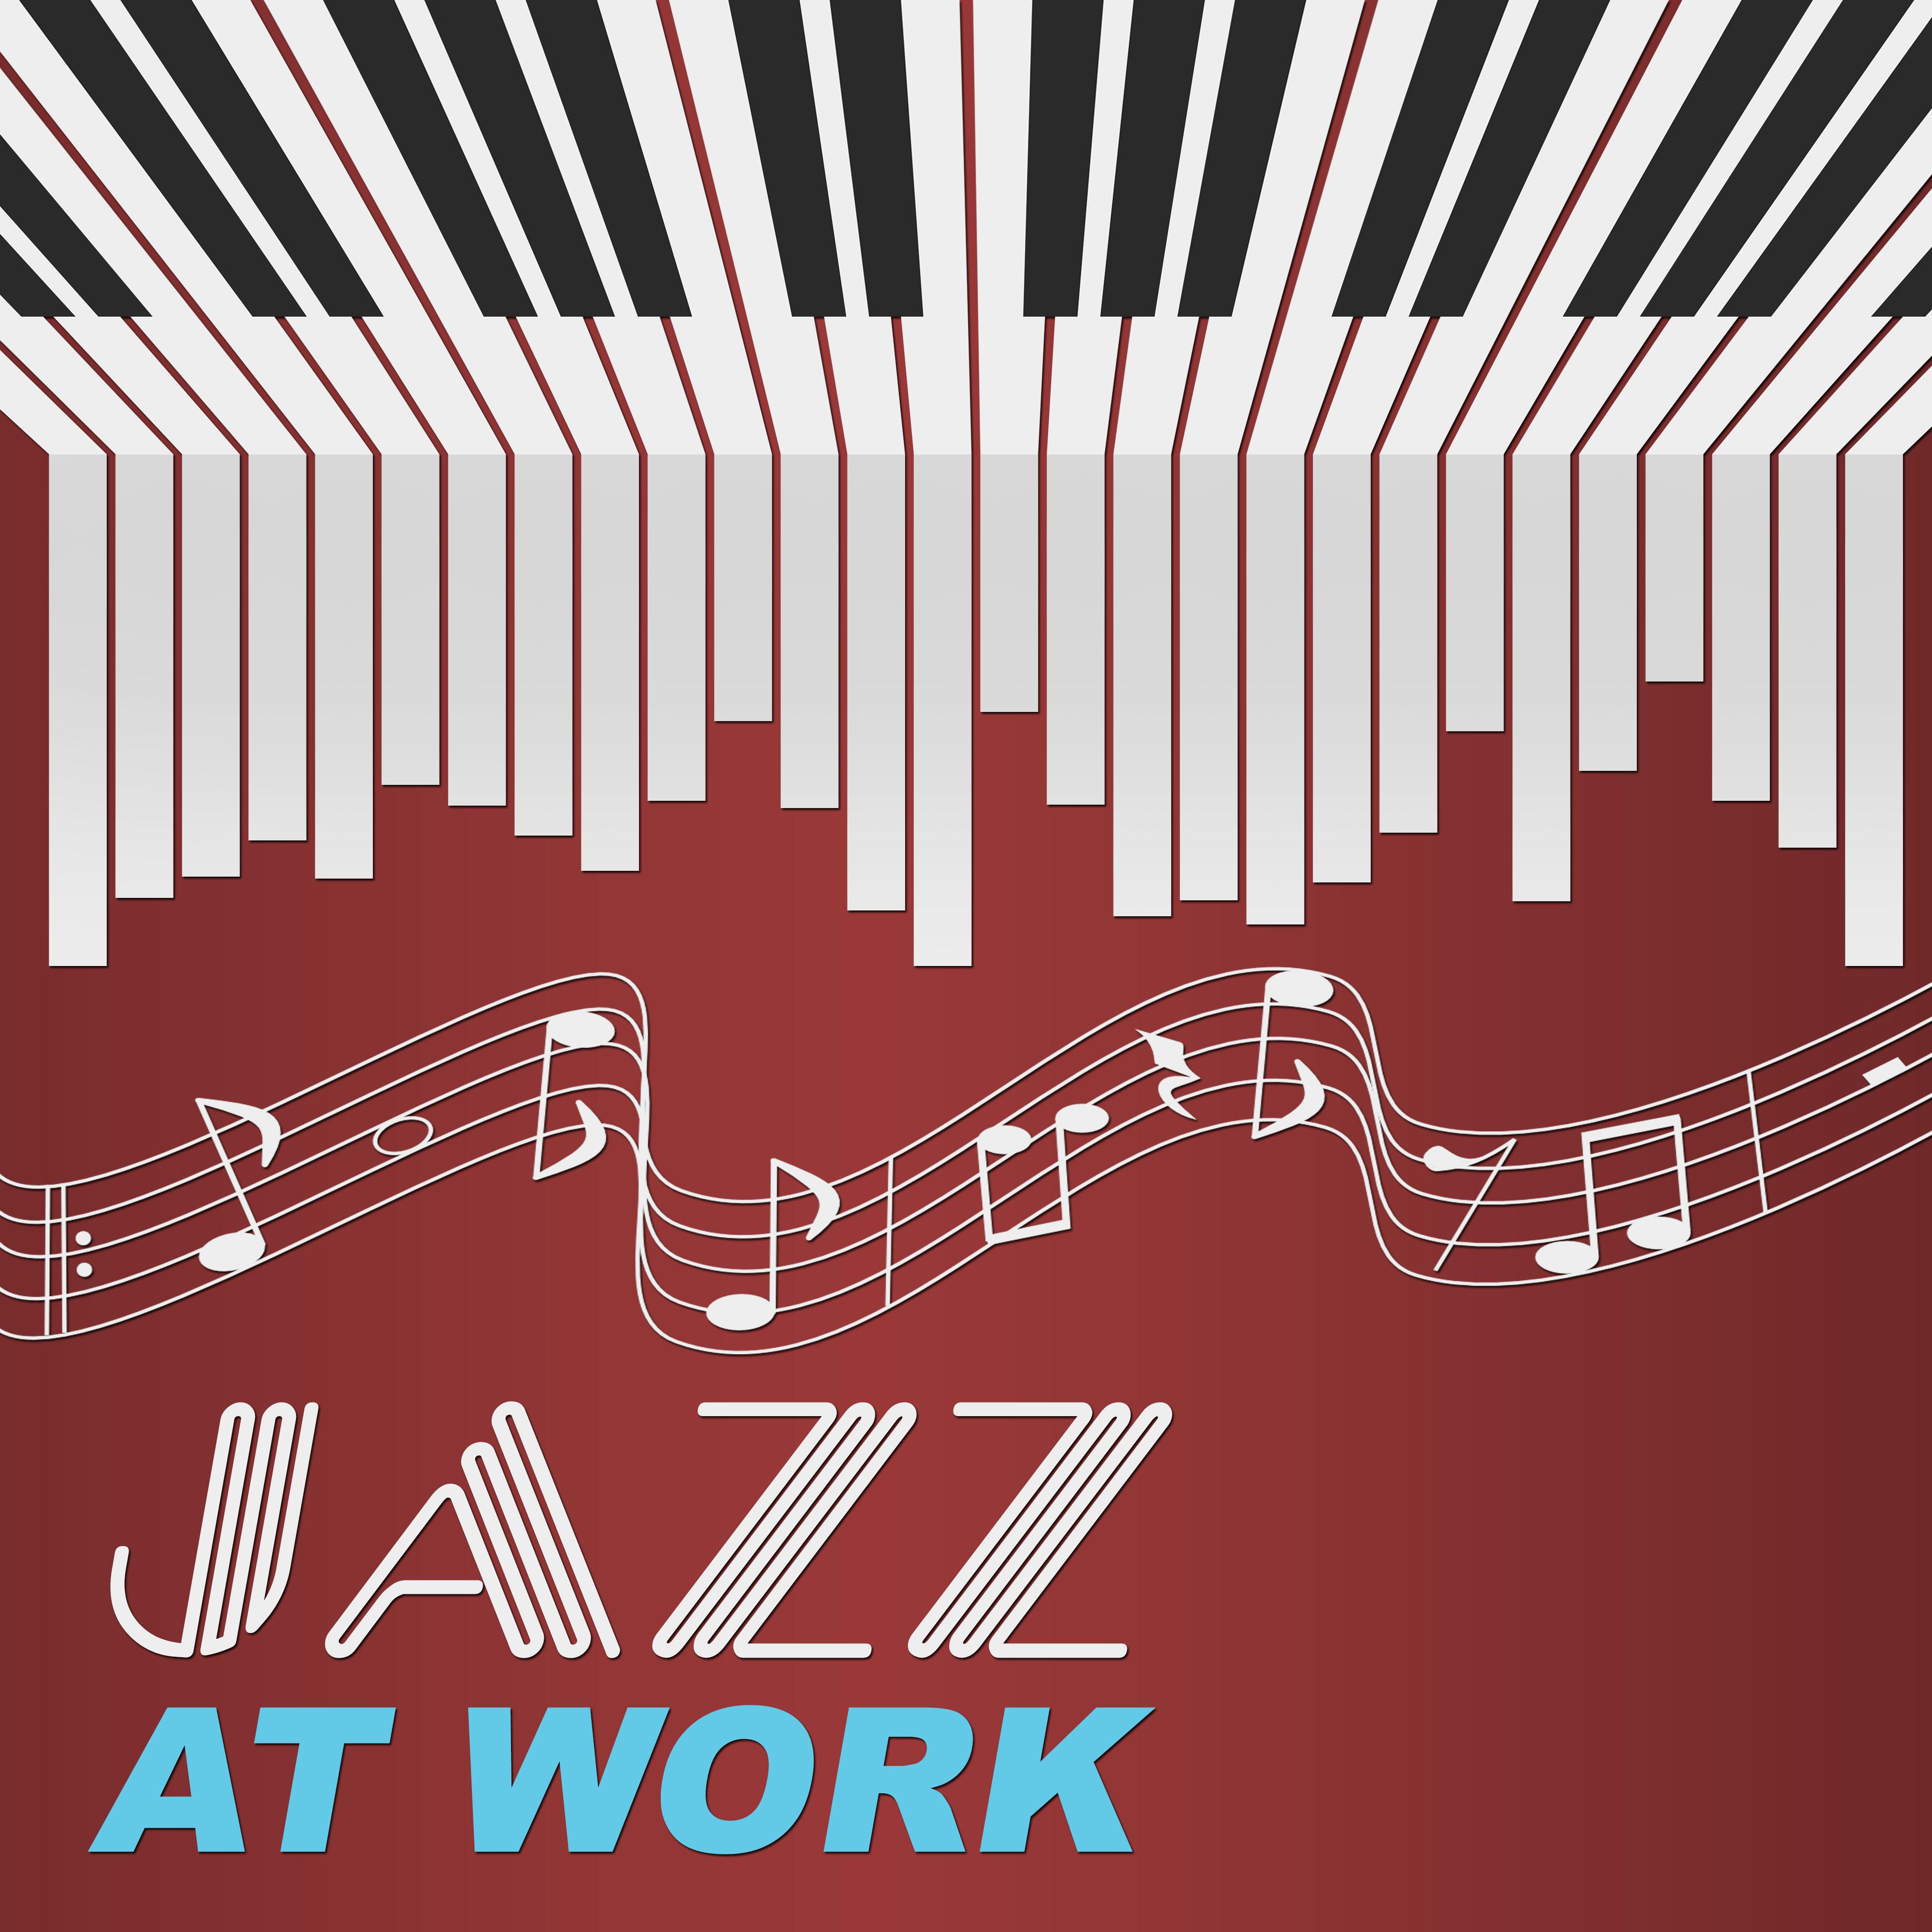 Jazz at Work  Best Ways to Relax at Work, Smooth Jazz Music, Peaceful Sounds for Relaxation, Background Sounds to Calm Down, Take a Break with Jazz